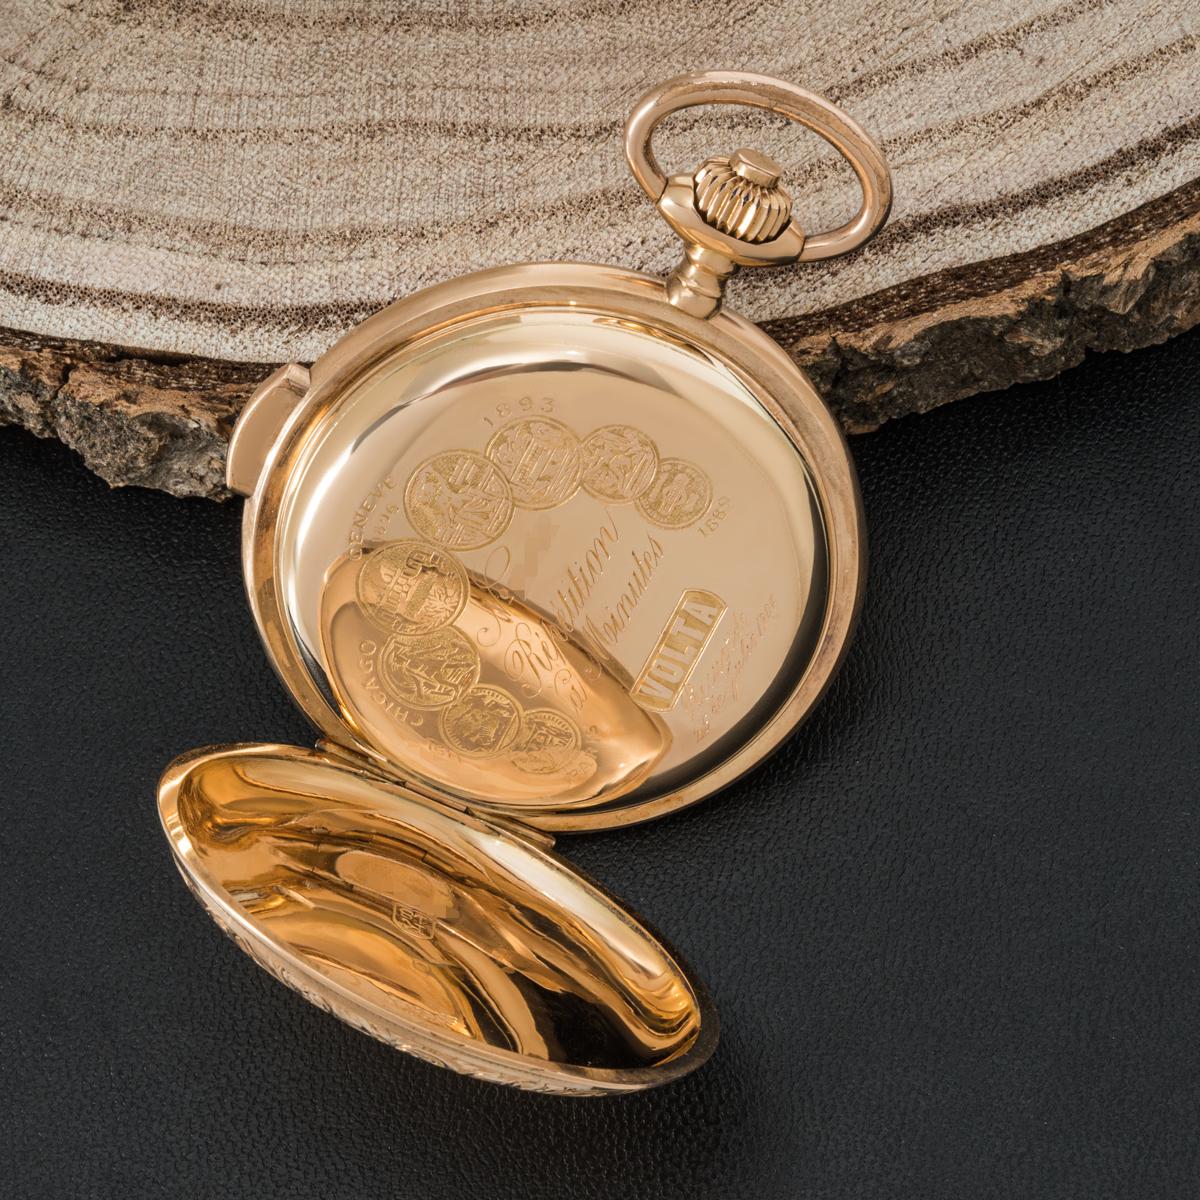 Volta Rose Gold Minute Repeater Keyless Lever Full Hunter Pocket Watch C1880 In Good Condition For Sale In London, GB